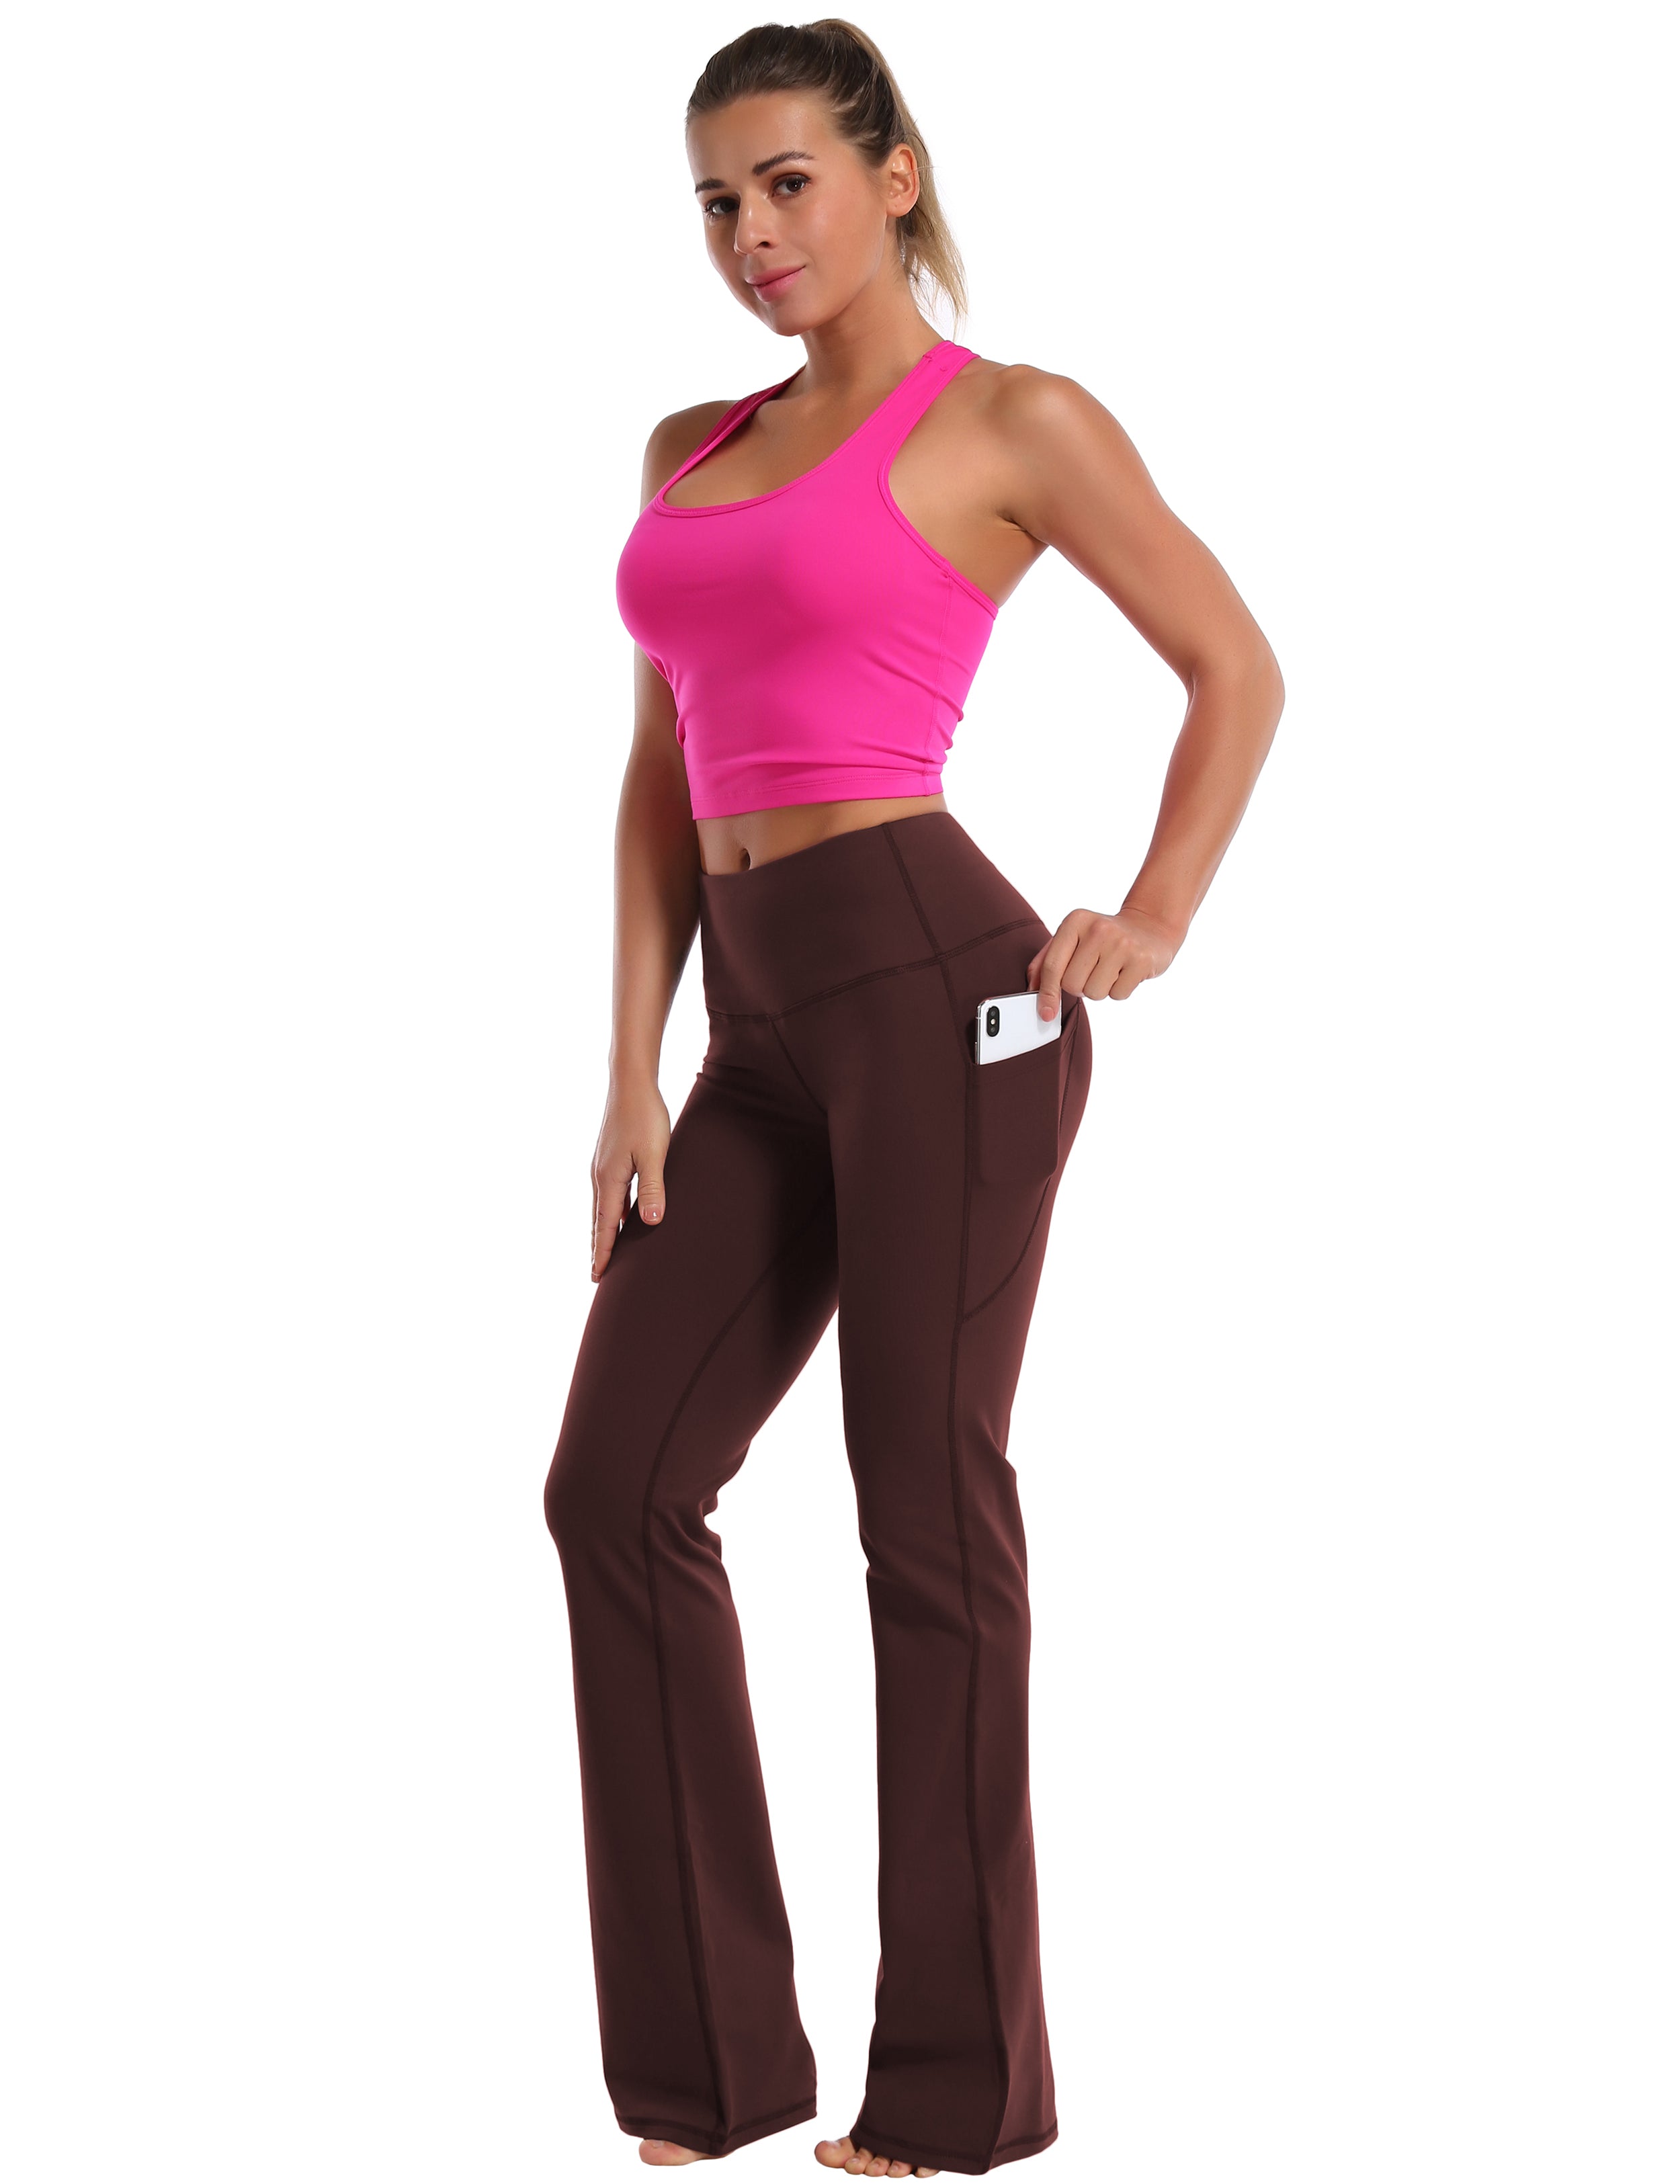 139 Side Pockets Bootcut Leggings mahoganymaroon 87%Nylon/13%Spandex Fabric doesn't attract lint easily 4-way stretch No see-through Moisture-wicking Tummy control Inner pocket Four lengths